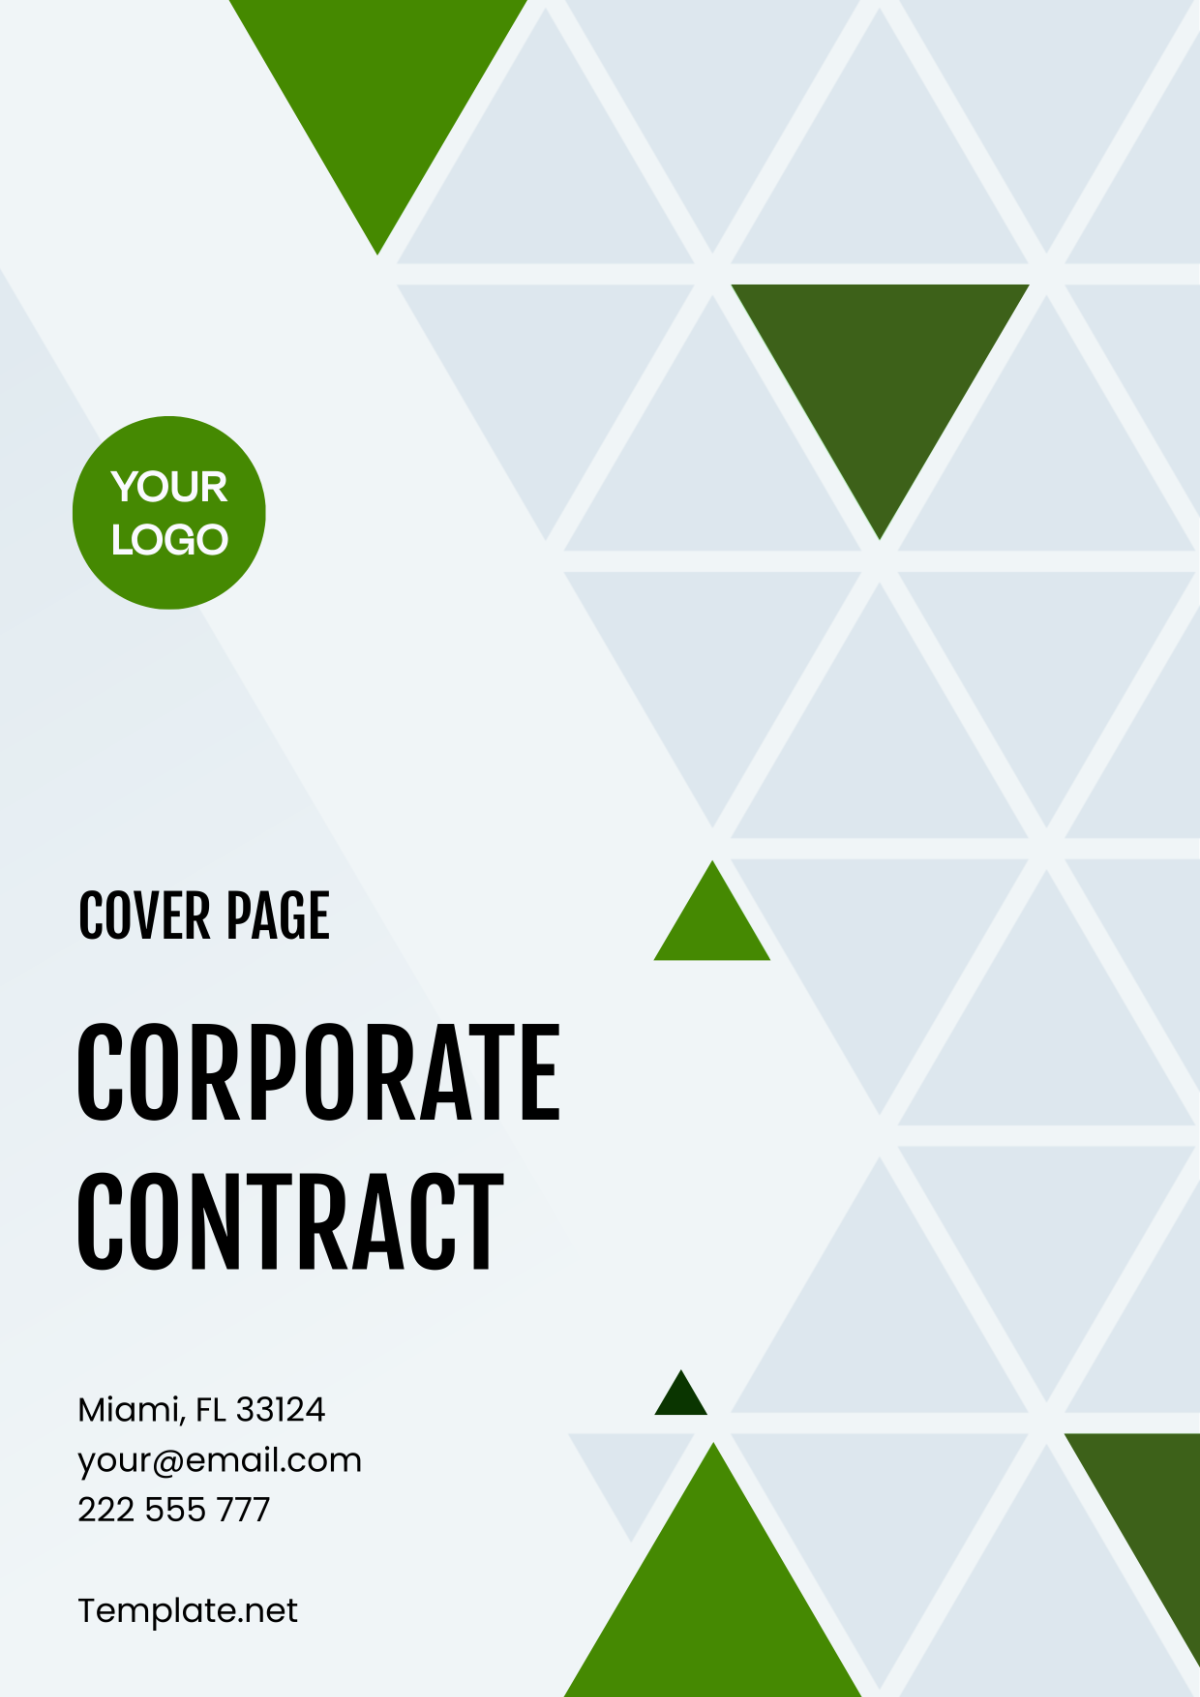 Corporate Contract Cover Page